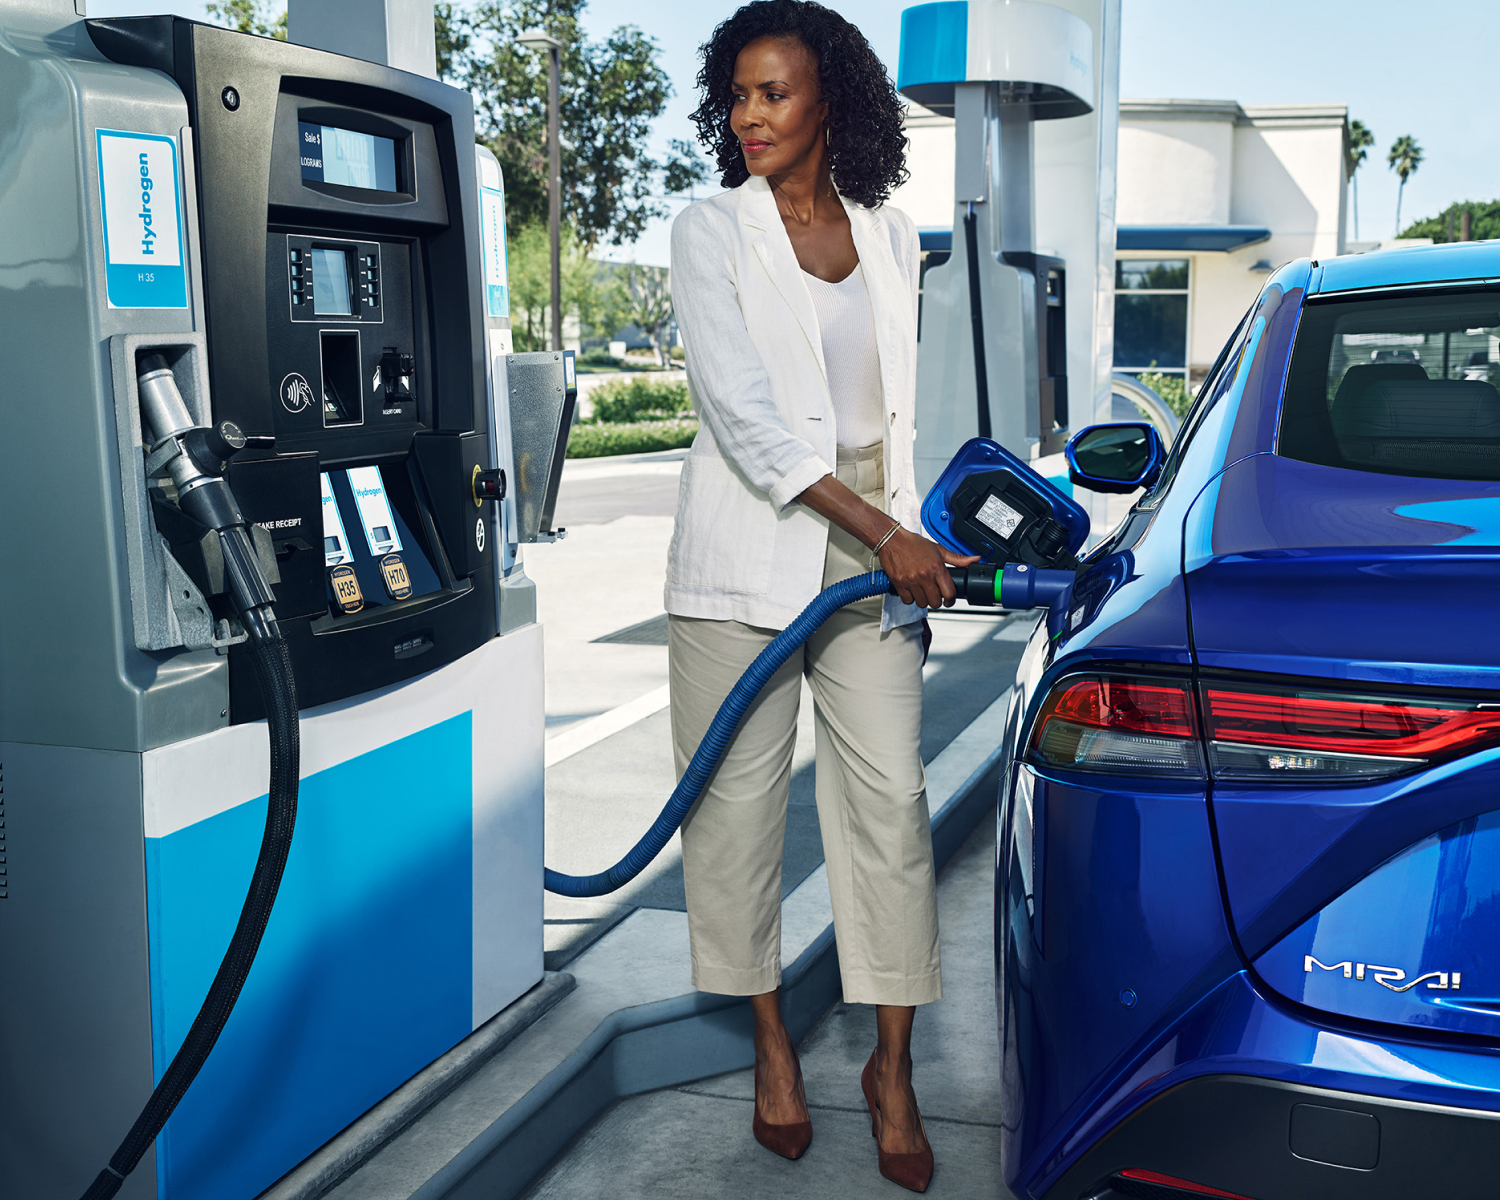 Mirai XLE shown in Hydro Blue at charging station